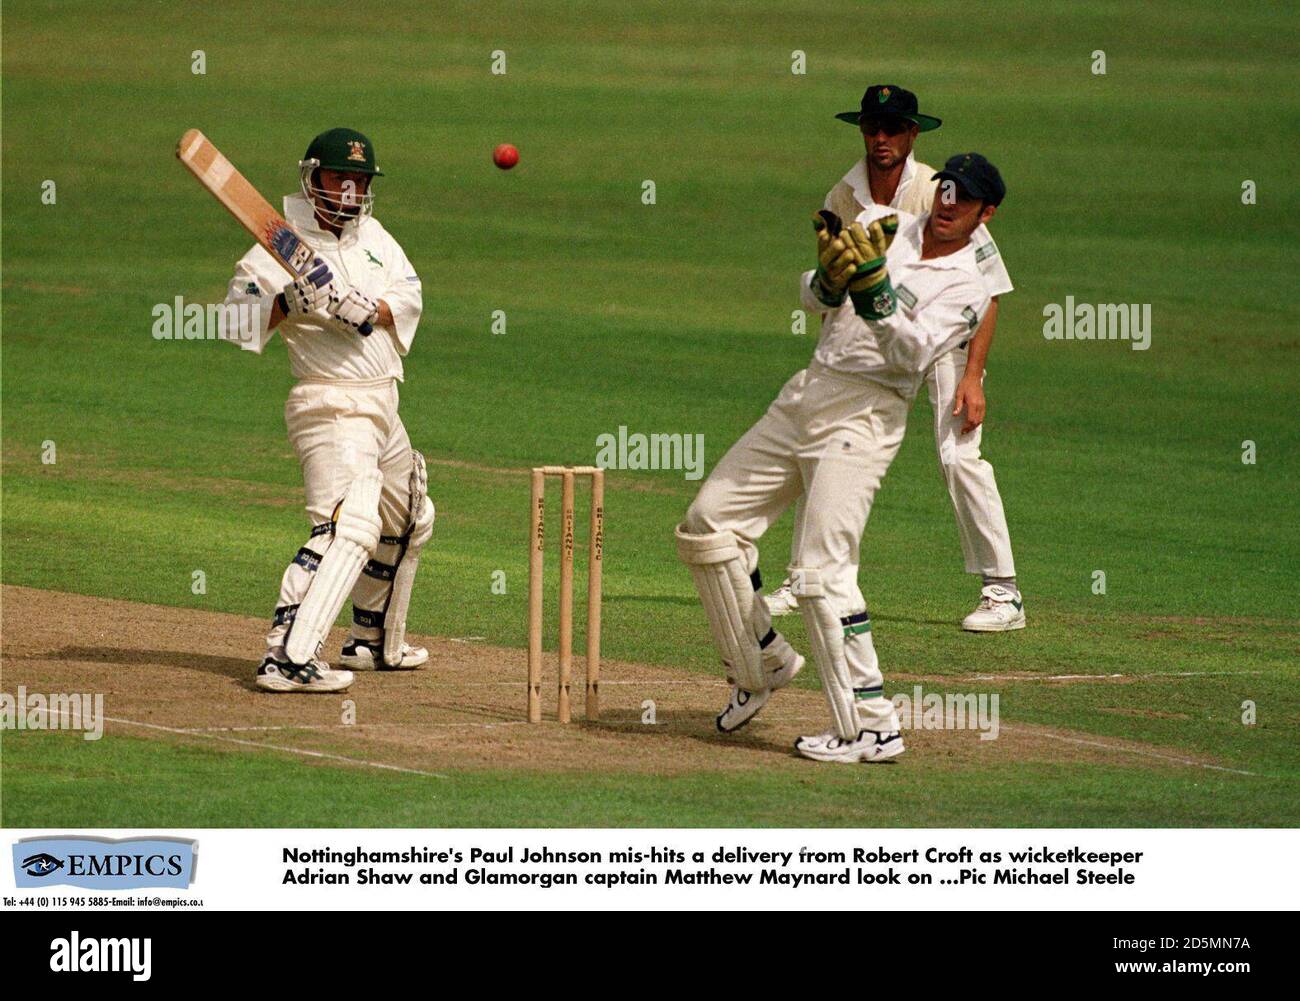 Nottinghamshire's Paul Johnson mis-hits a delivery from Robert Croft as wicketkeeper Adrian Shaw and Glamorgan captain Matthew Maynard look onr Stock Photo